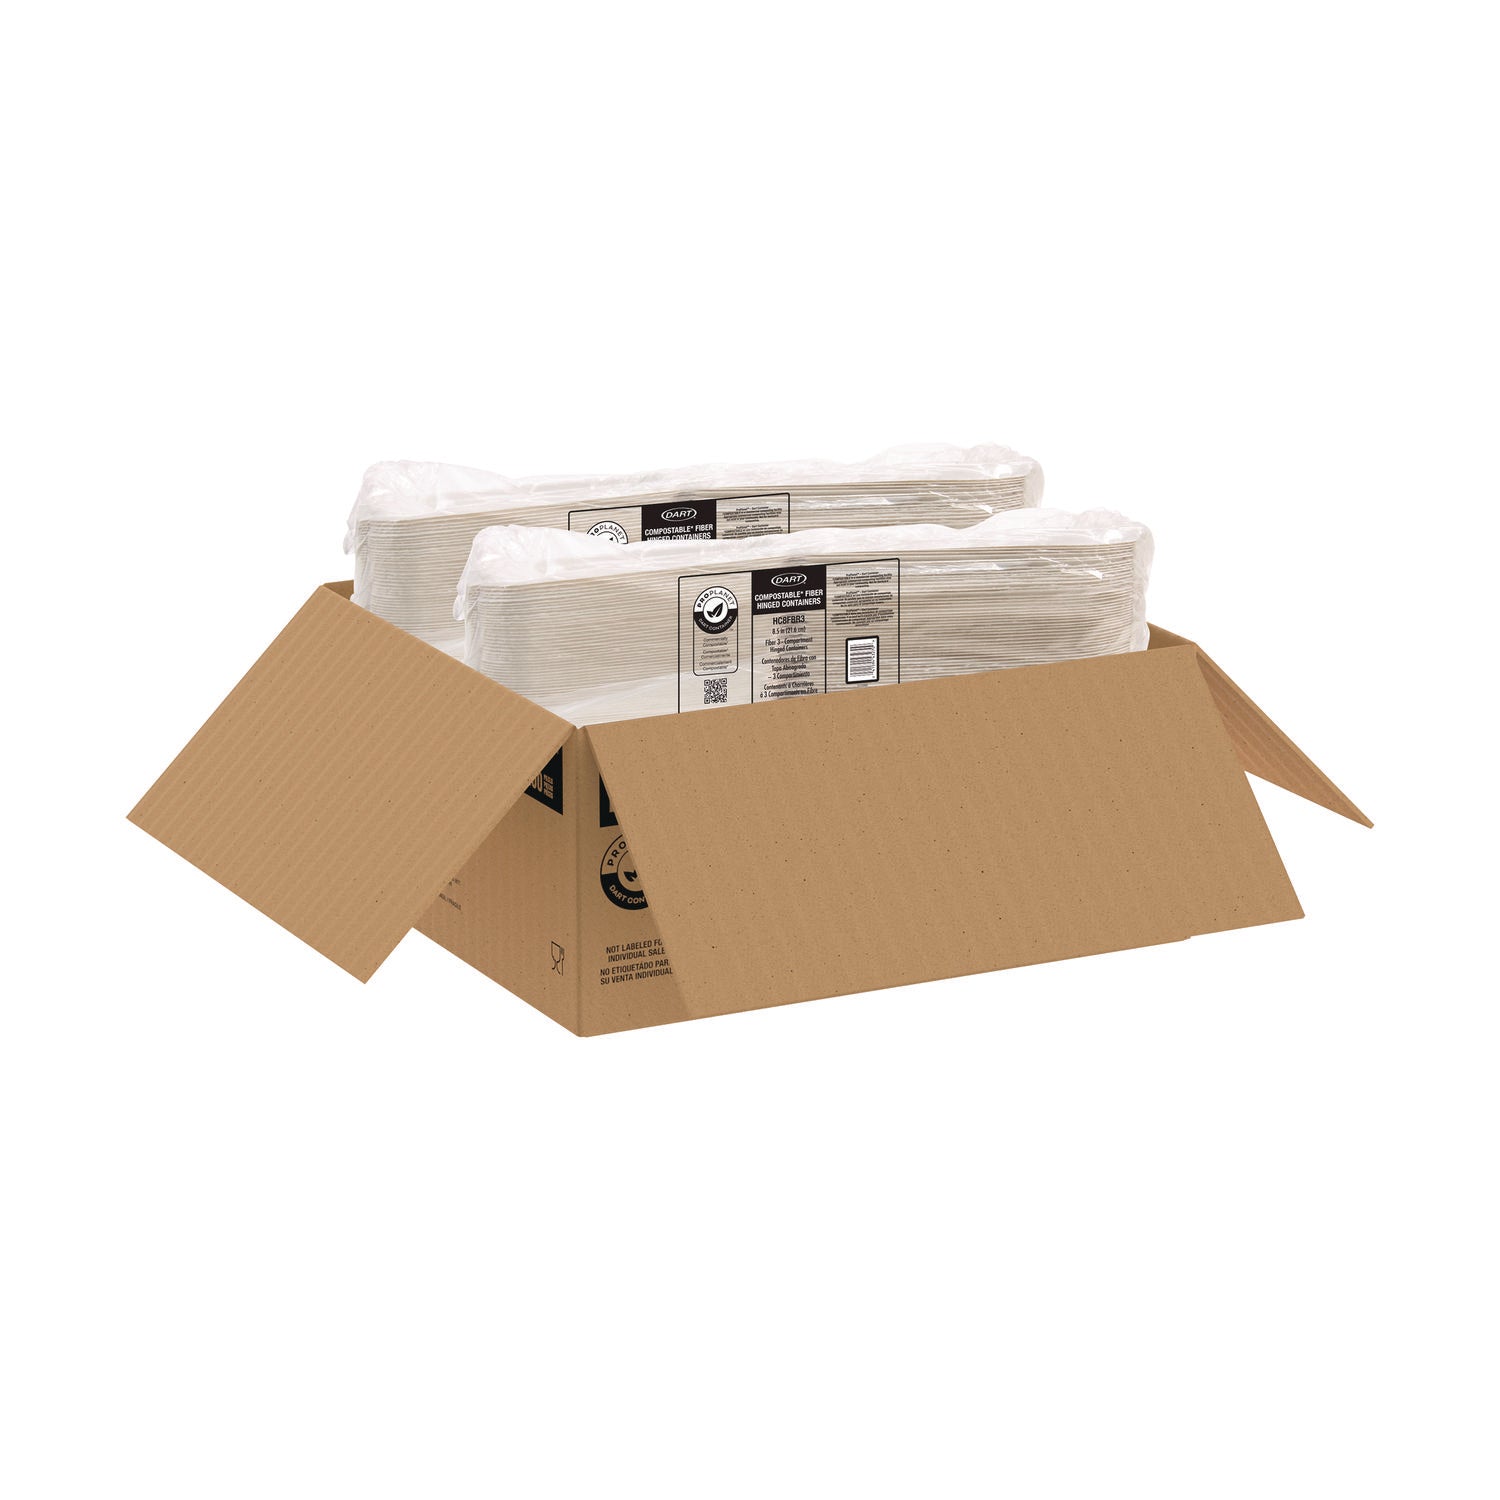 compostable-fiber-hinged-trays-proplanet-seal-3-compartment-803-x-84-x-193-ivory-molded-fiber-200-carton_dcchc8fbr3 - 4